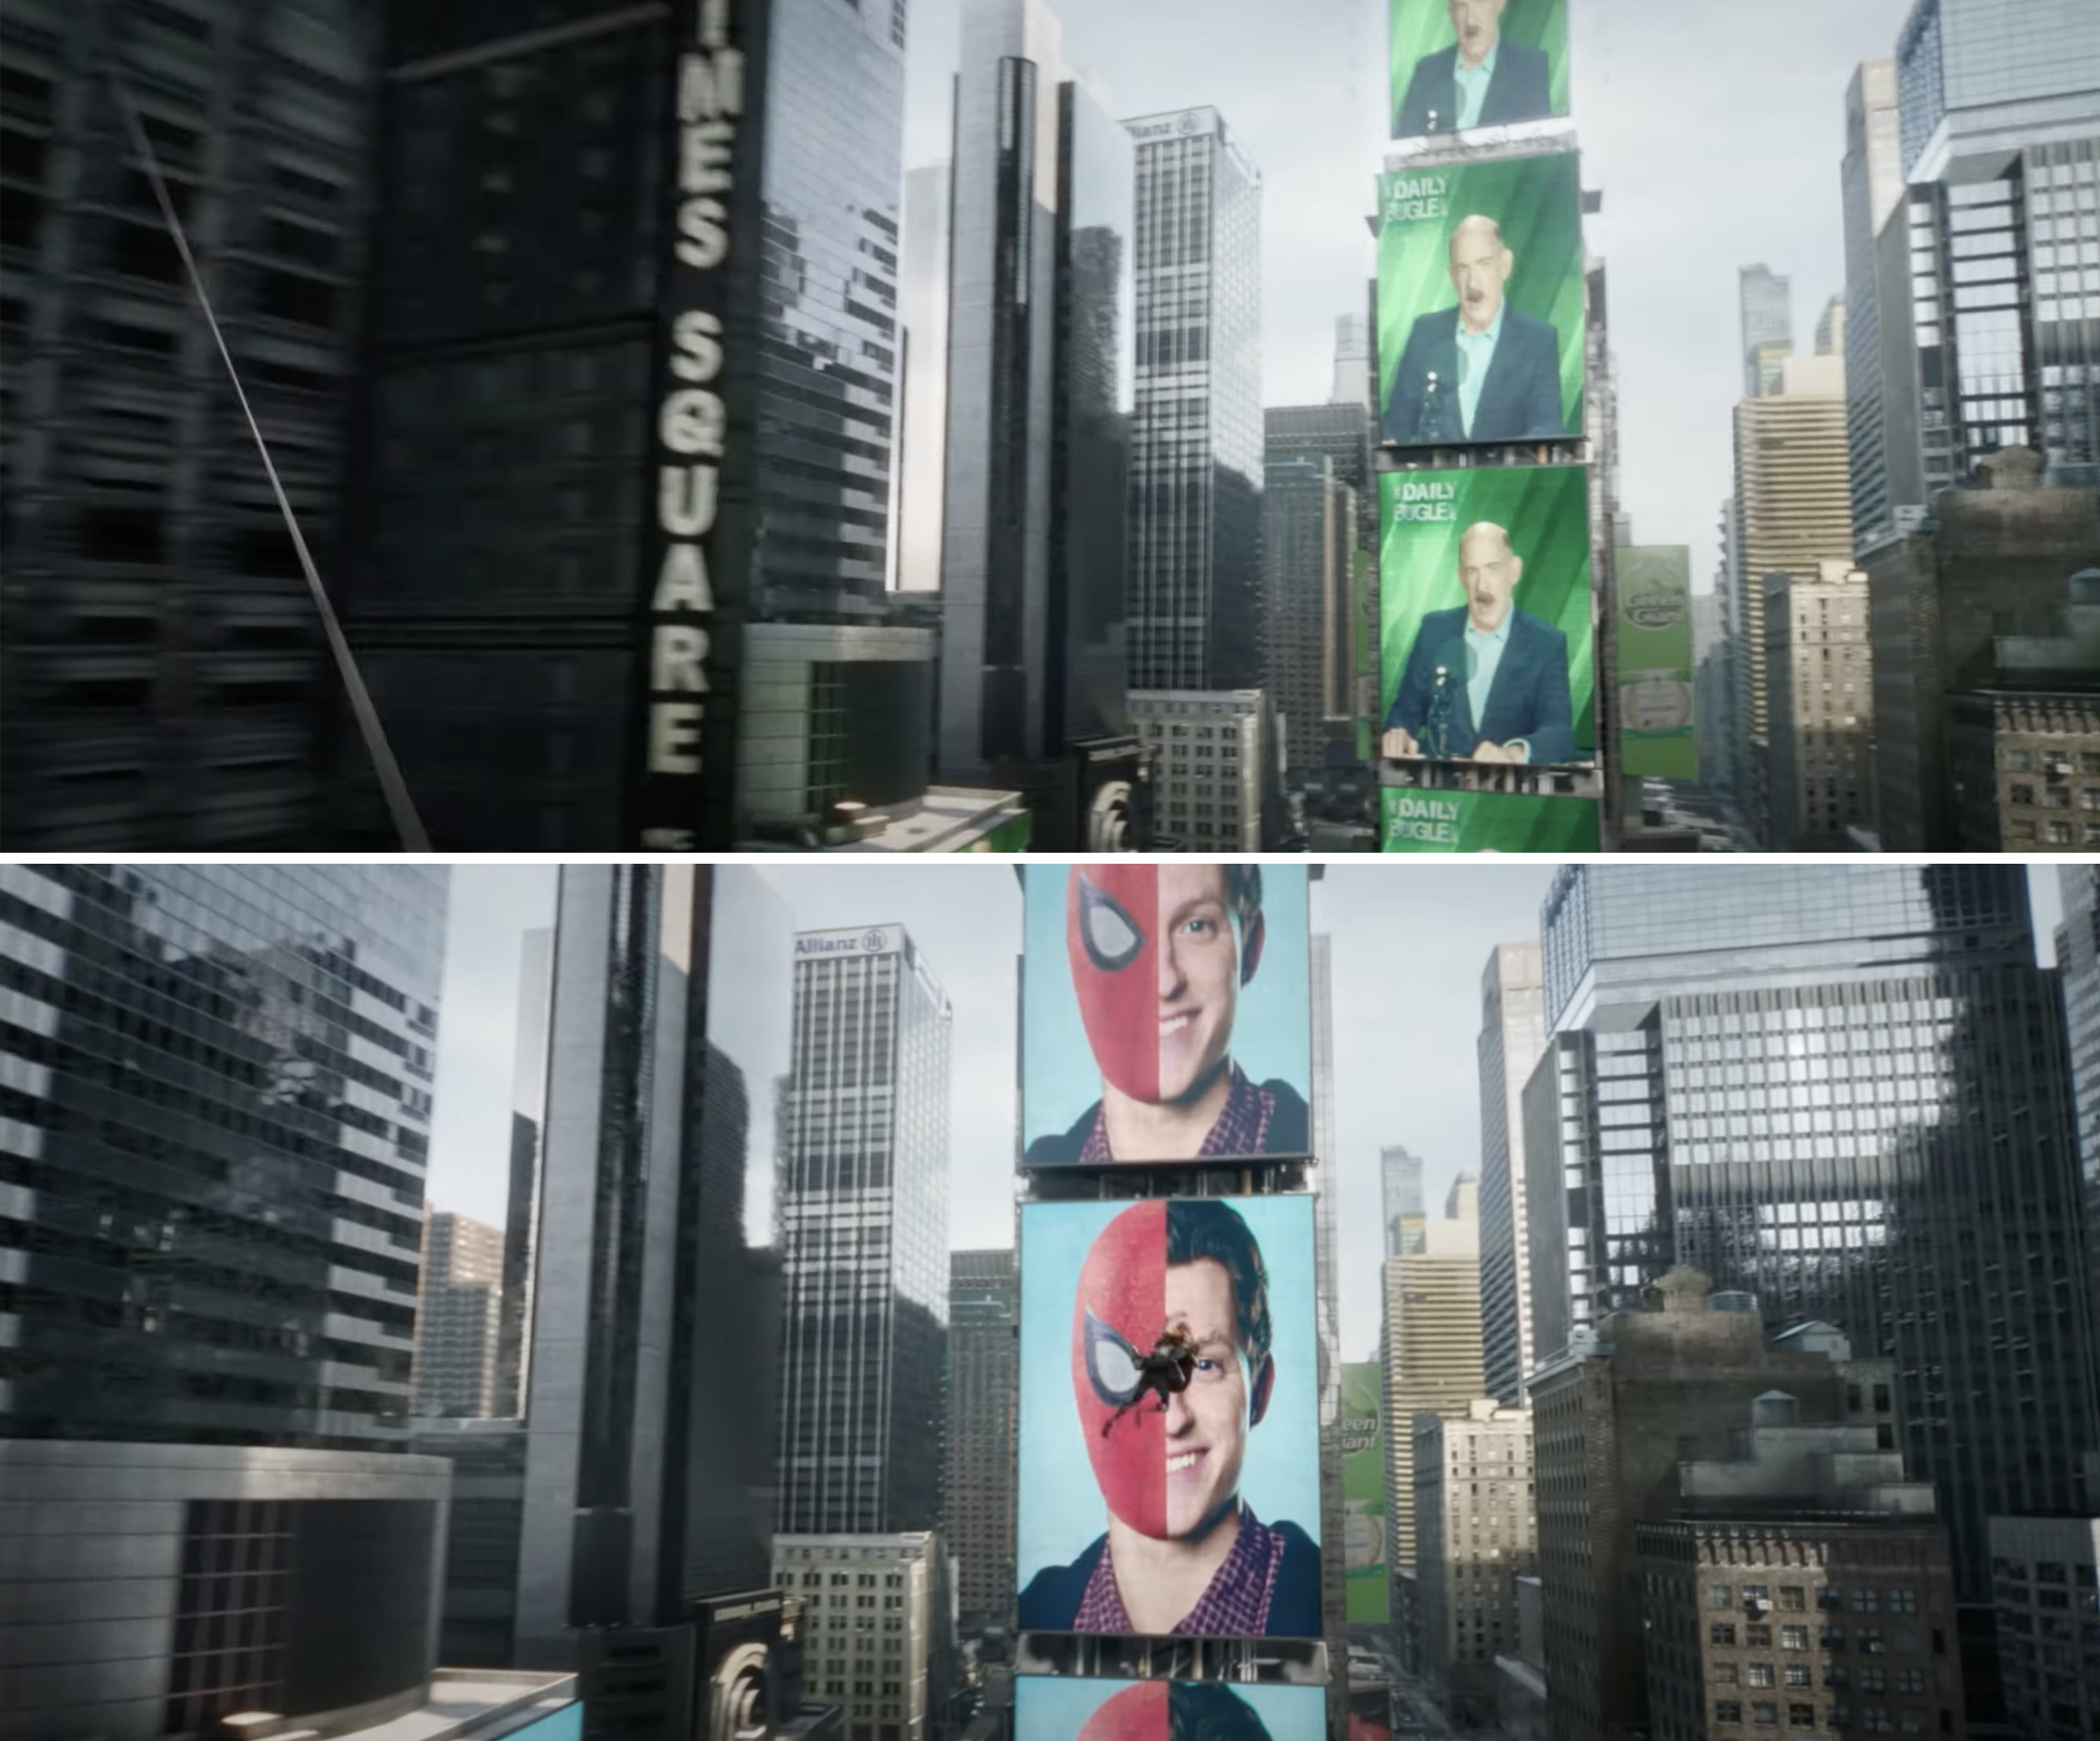 Peter&#x27;s identity being revealed on digital billboards